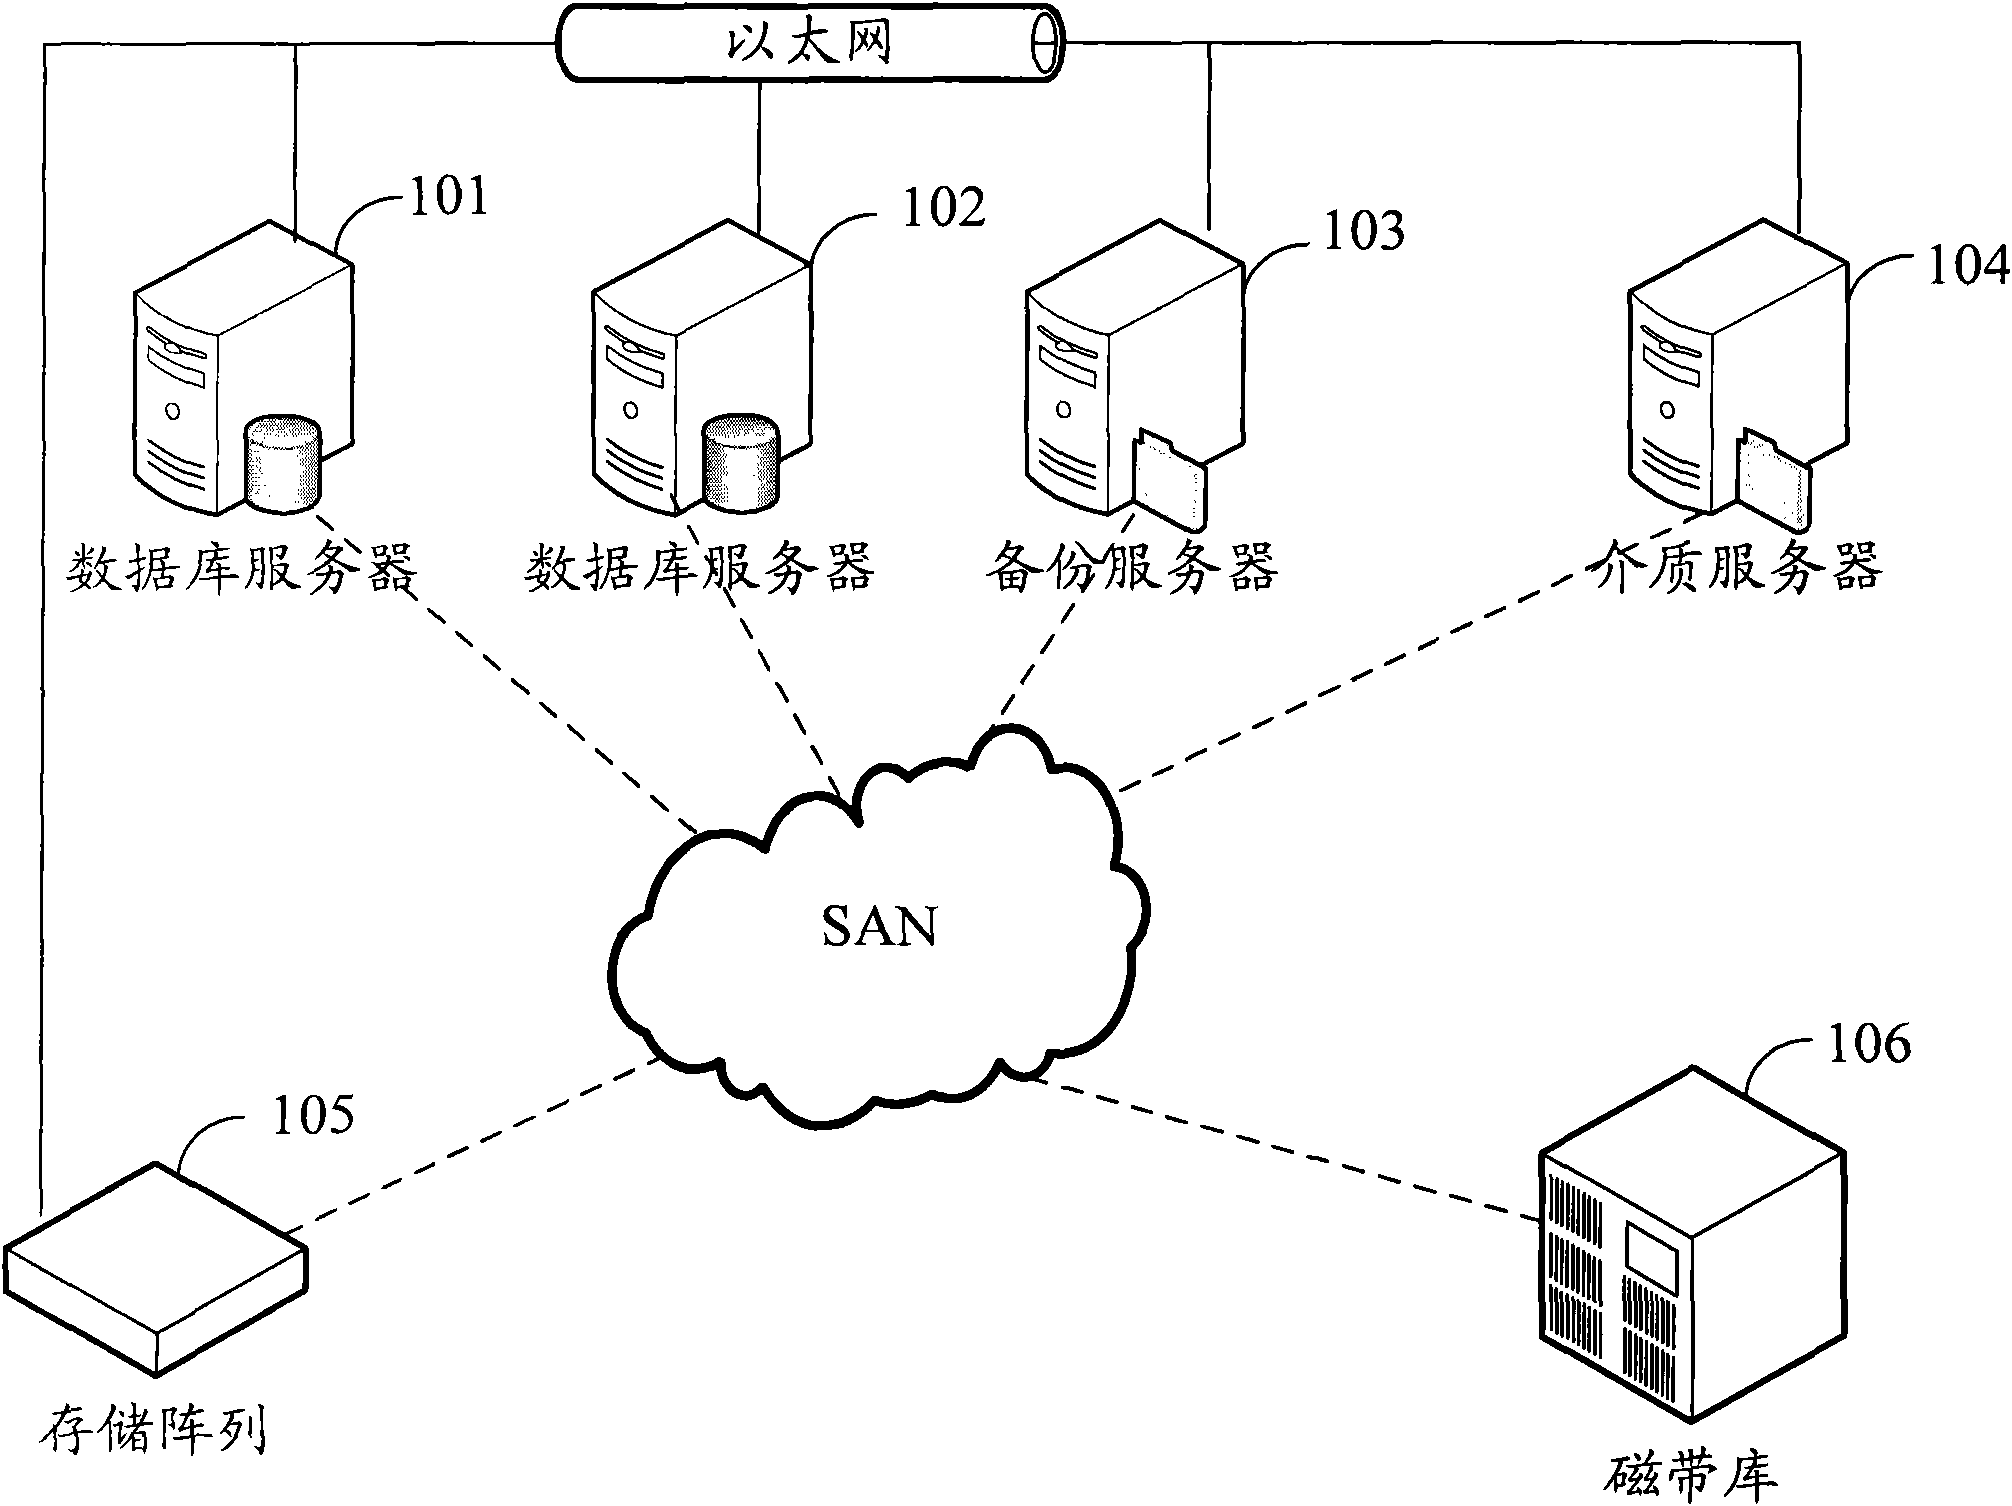 Method and system for online backup of database